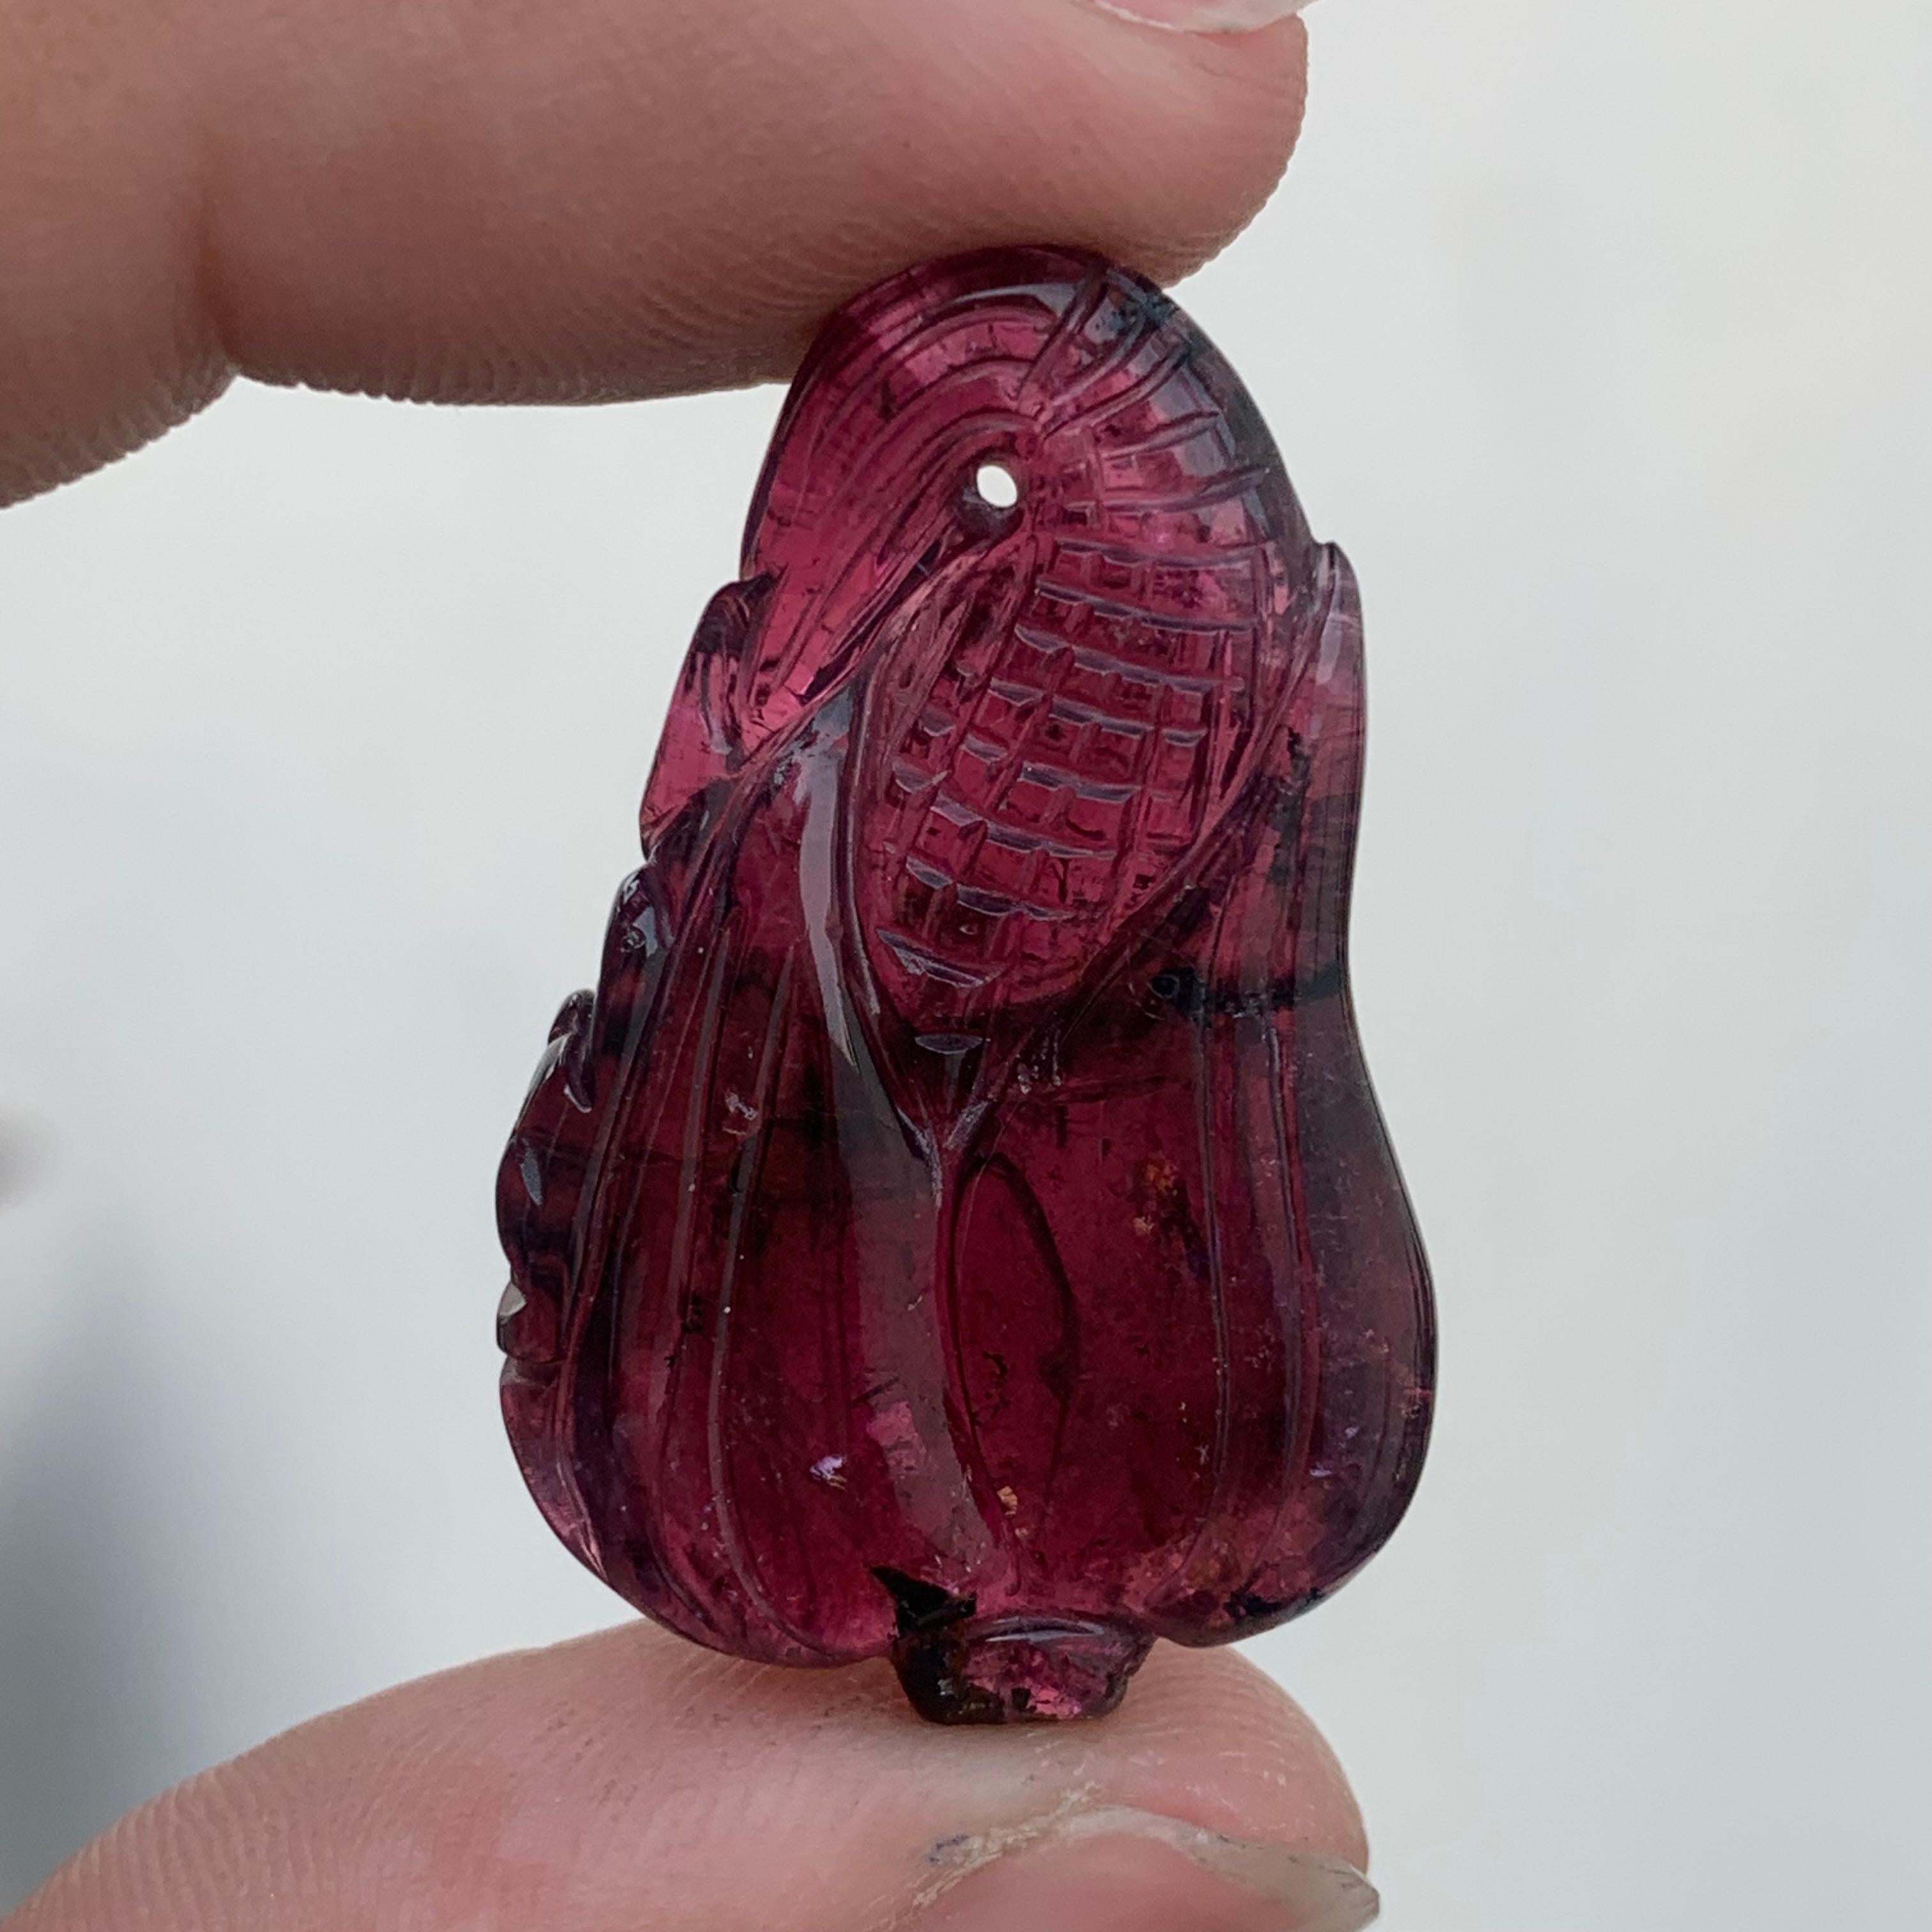 Tourmaline Carved
Weight: 37 Carats
Dimension: 34x21x7 Mm
Origin: Africa
Color: Red 
Shape: Carving
Quality: Top
.
Bicolor tourmaline is connected to the heart chakra, which makes it good for cleansing and removing any blockages. The stone restores